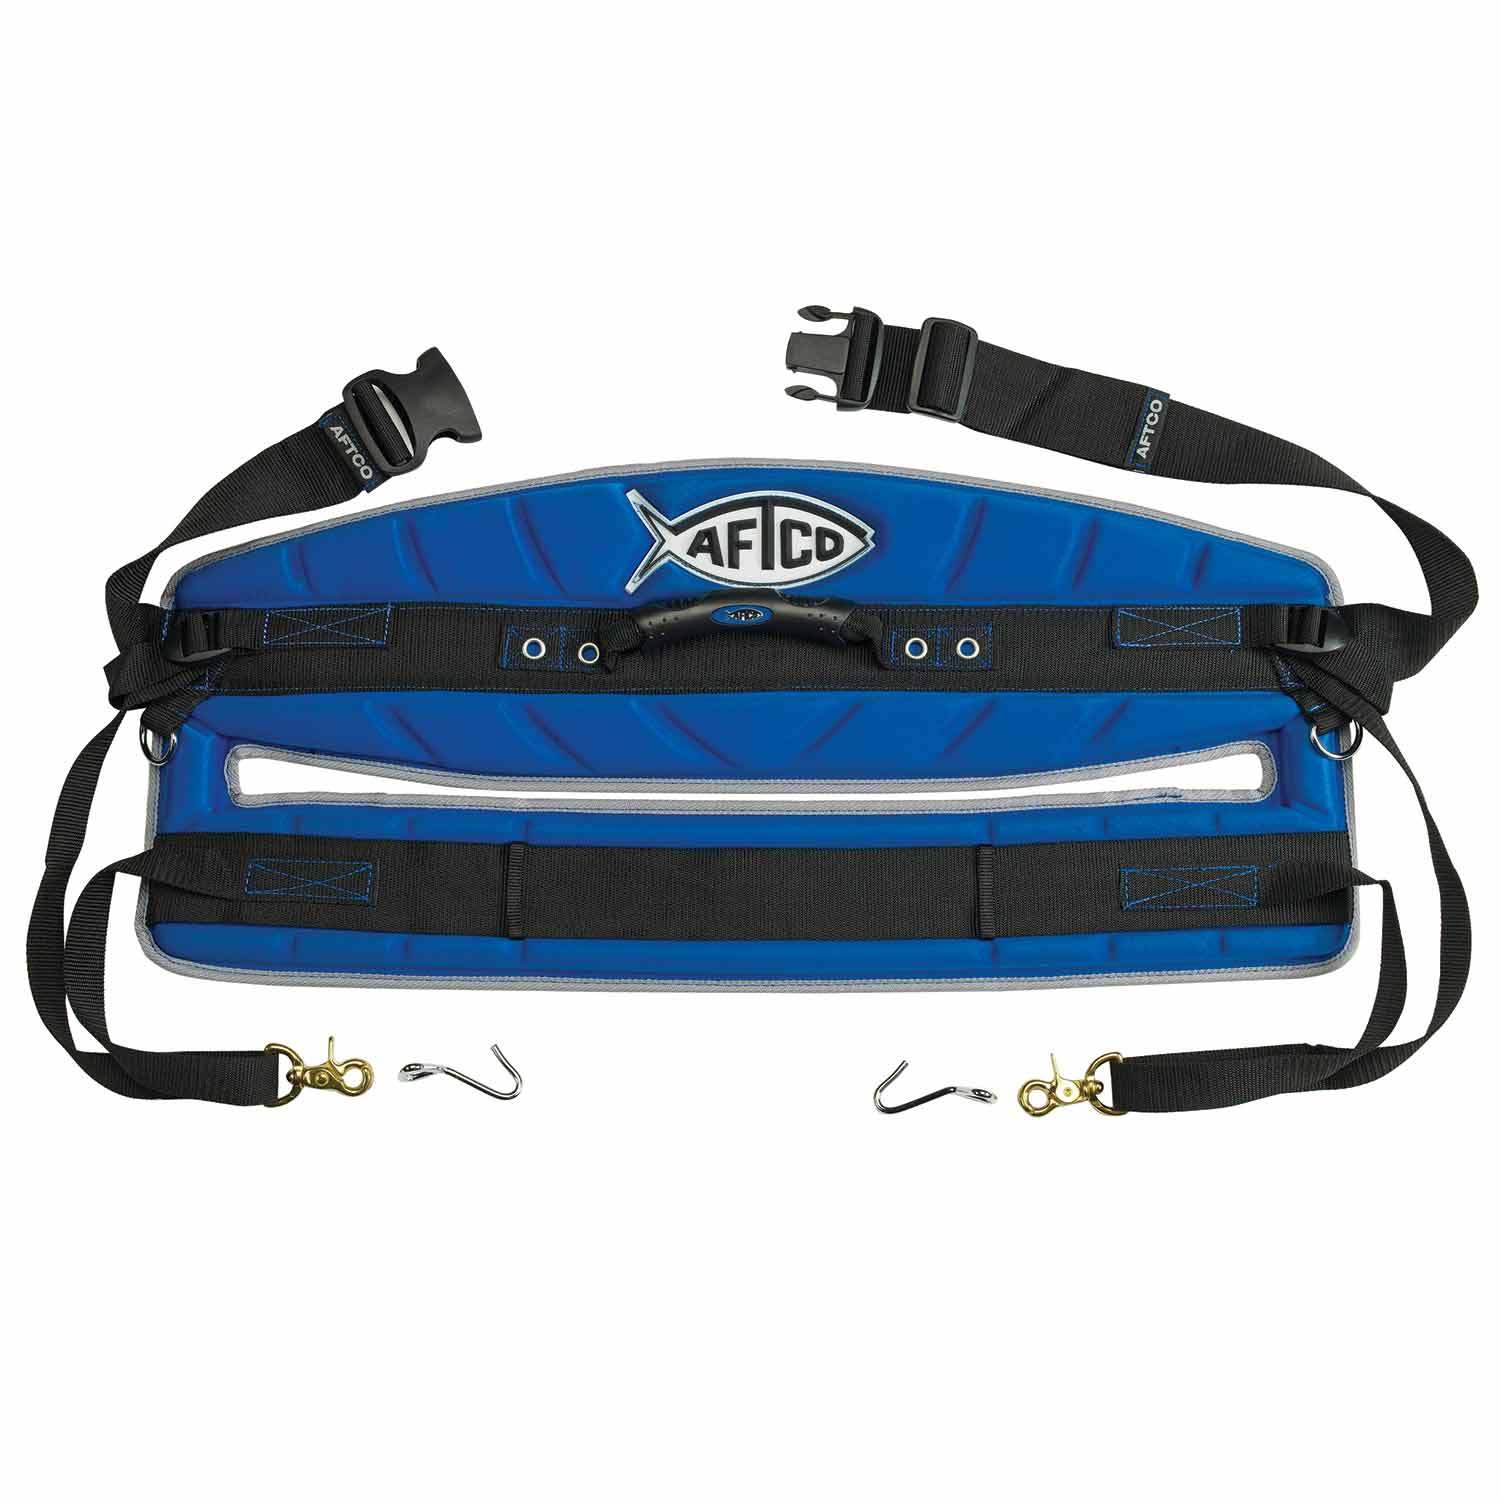 AFTCO AFTCO Maxforce™ AFH-1 Stand Up Harness